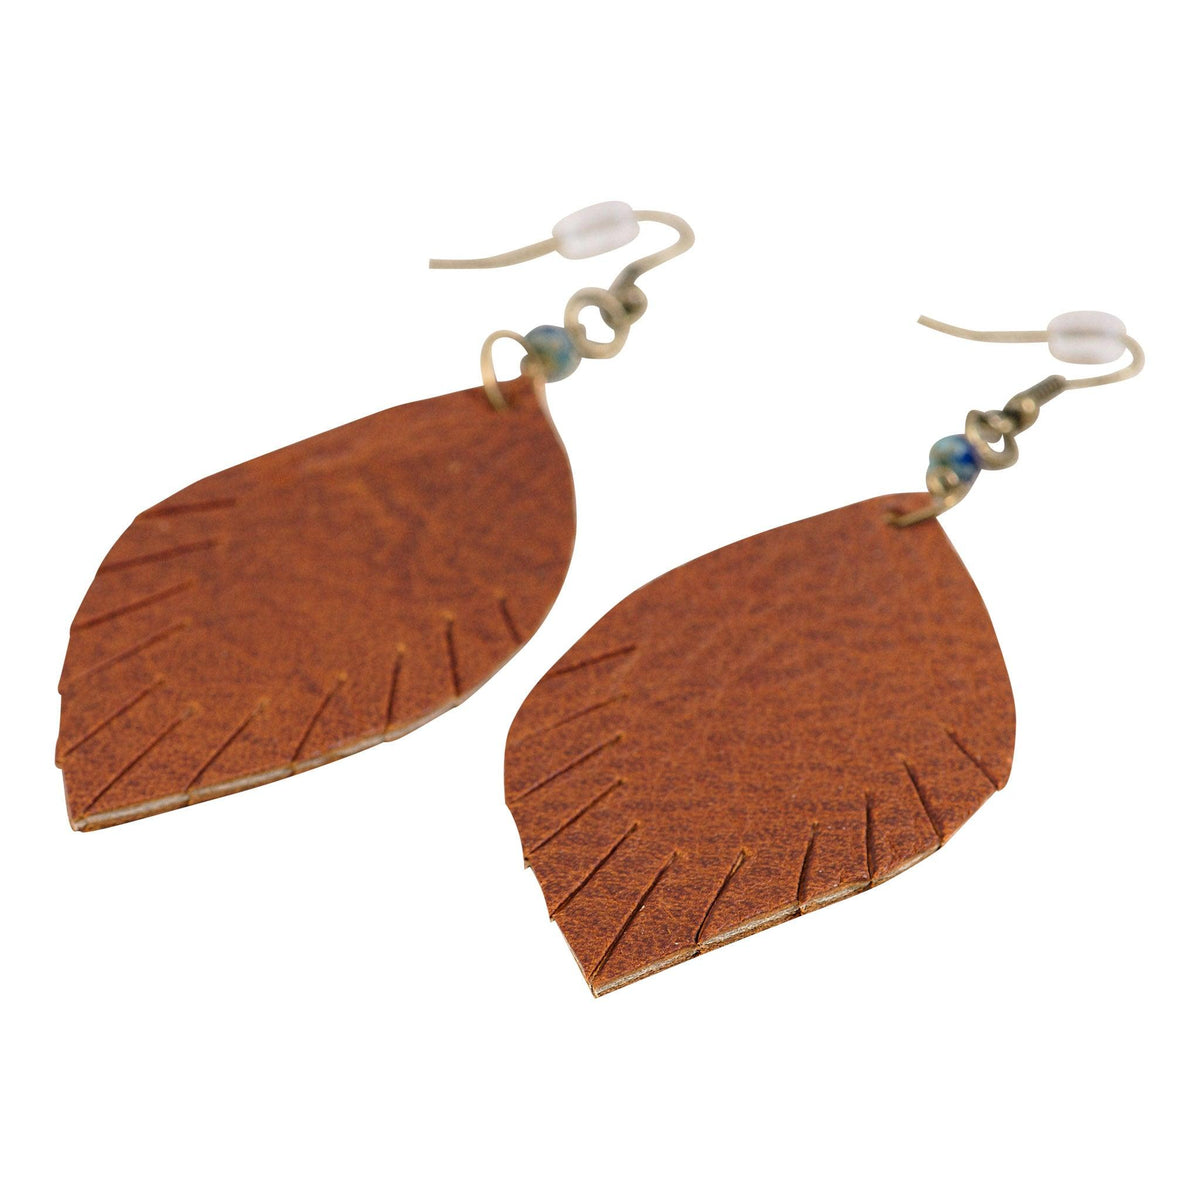 ROP-Cognac Leather Feather Earring Med - GLORY HAUS 